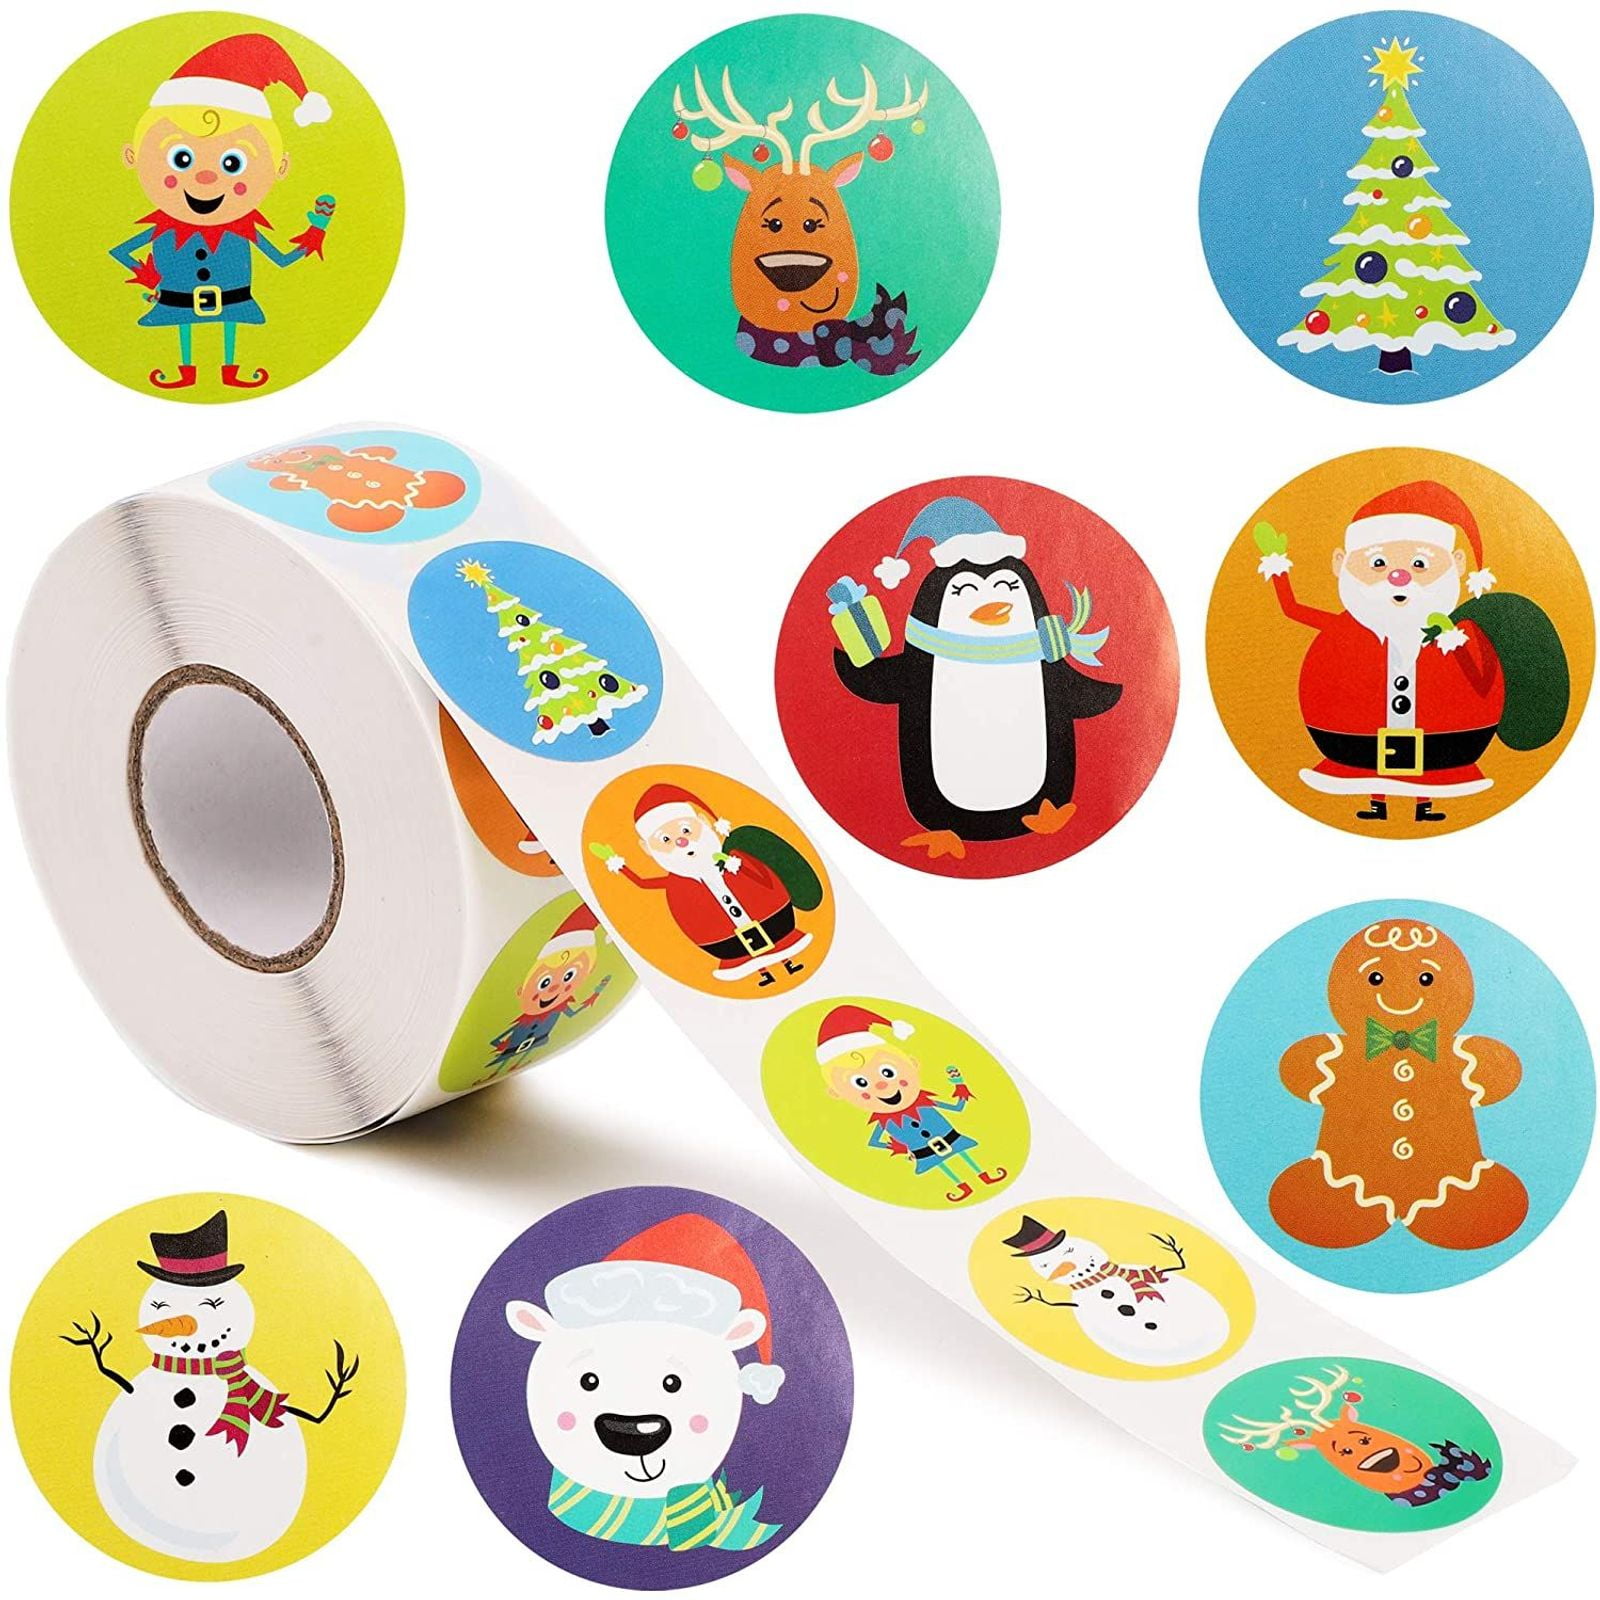 CHRISTMAS STICKERS 1 PC XMAS PRESENT GIFT NOVELTY COLLECT DECAL DECORATION 